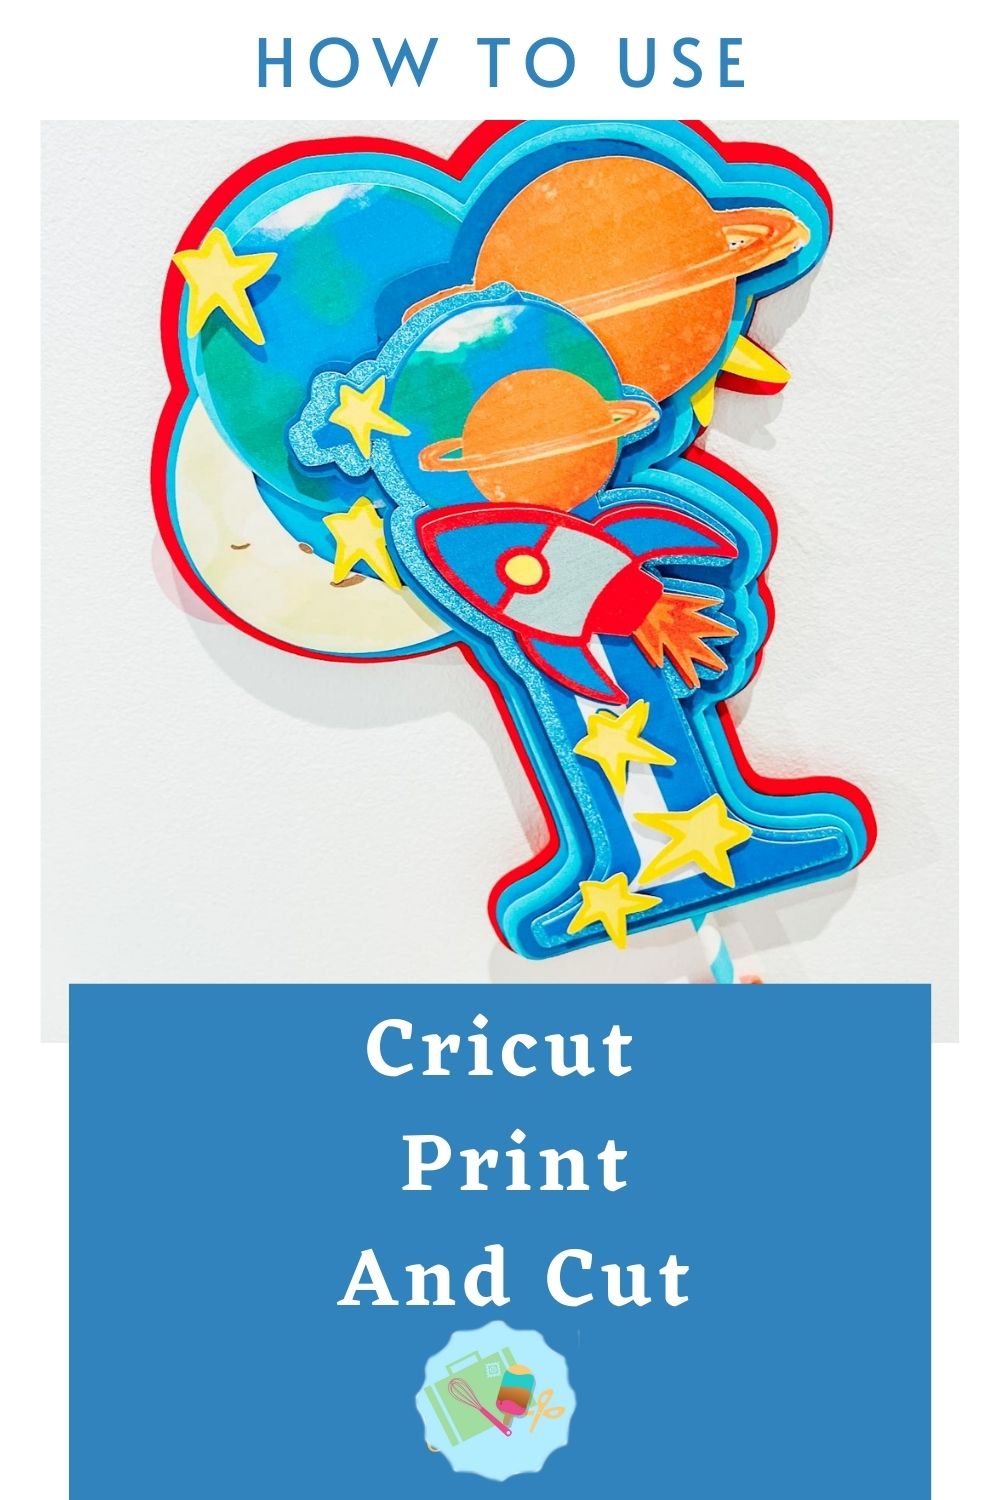 How to use Cricut Print and Cut a step by step tutorial